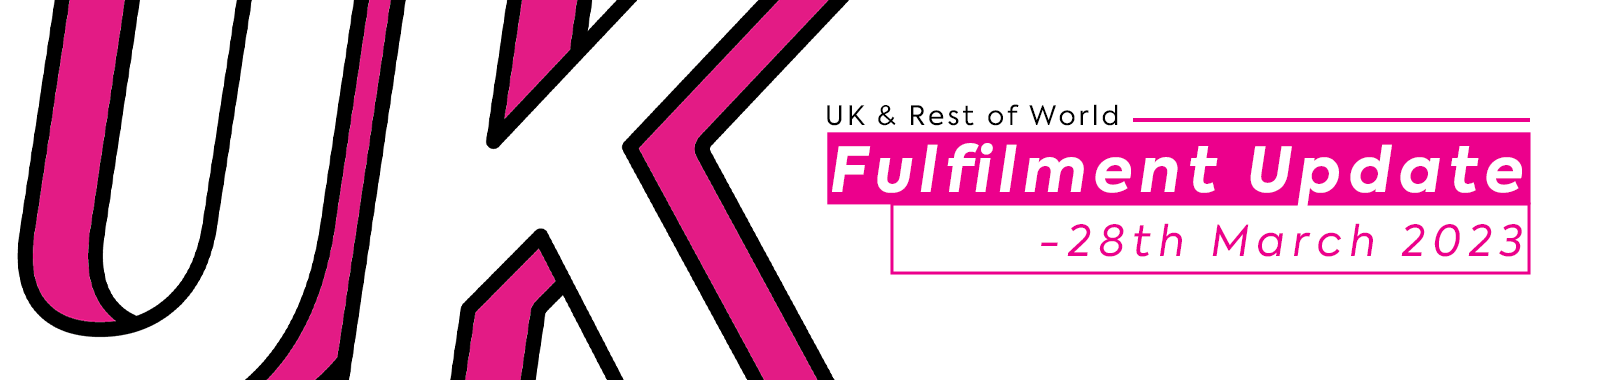 UK & ROW Fulfilment Update - 28th March